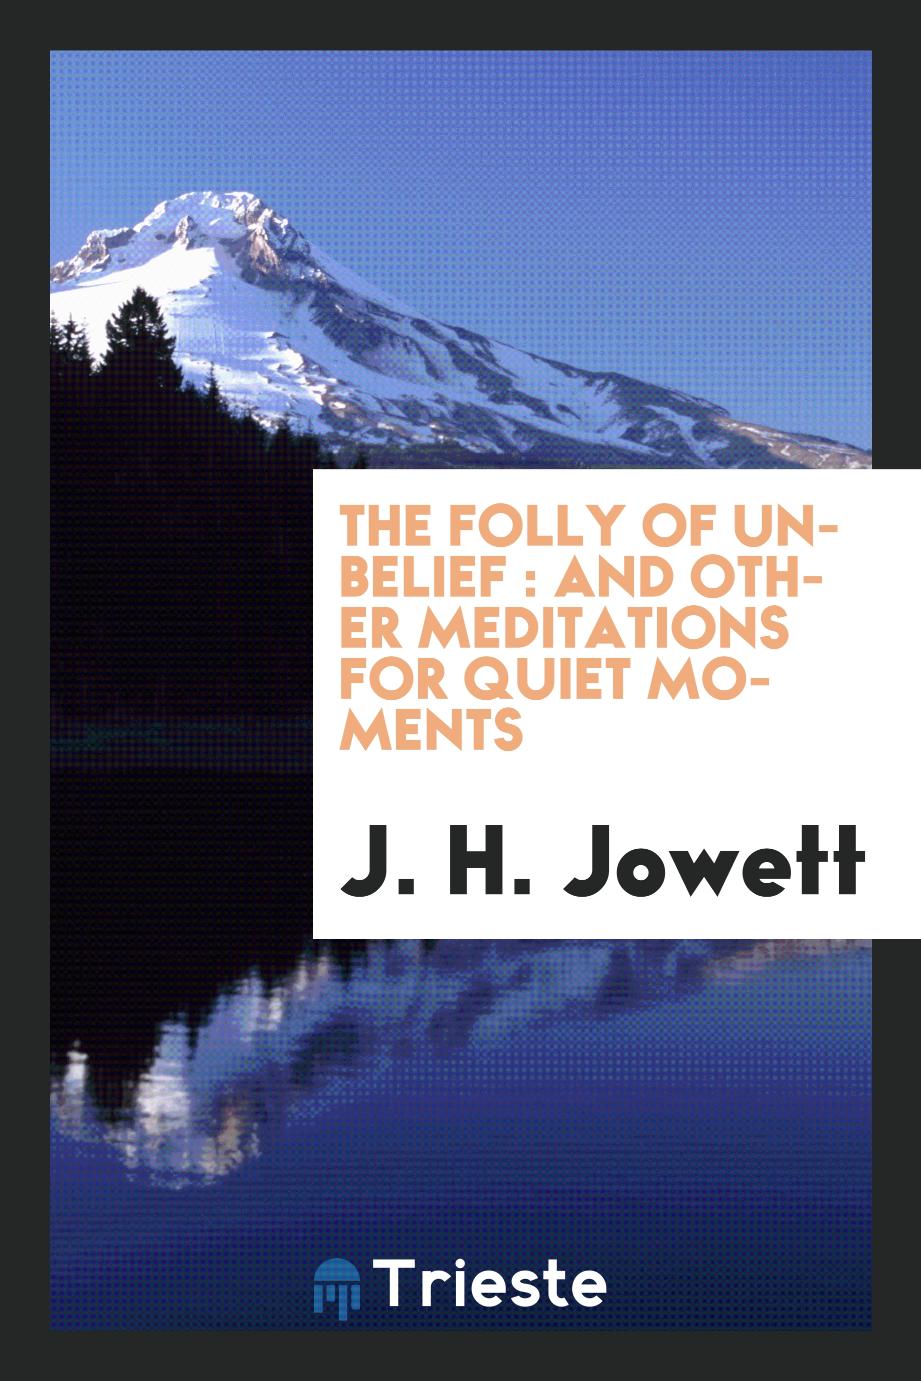 The folly of unbelief : and other meditations for quiet moments